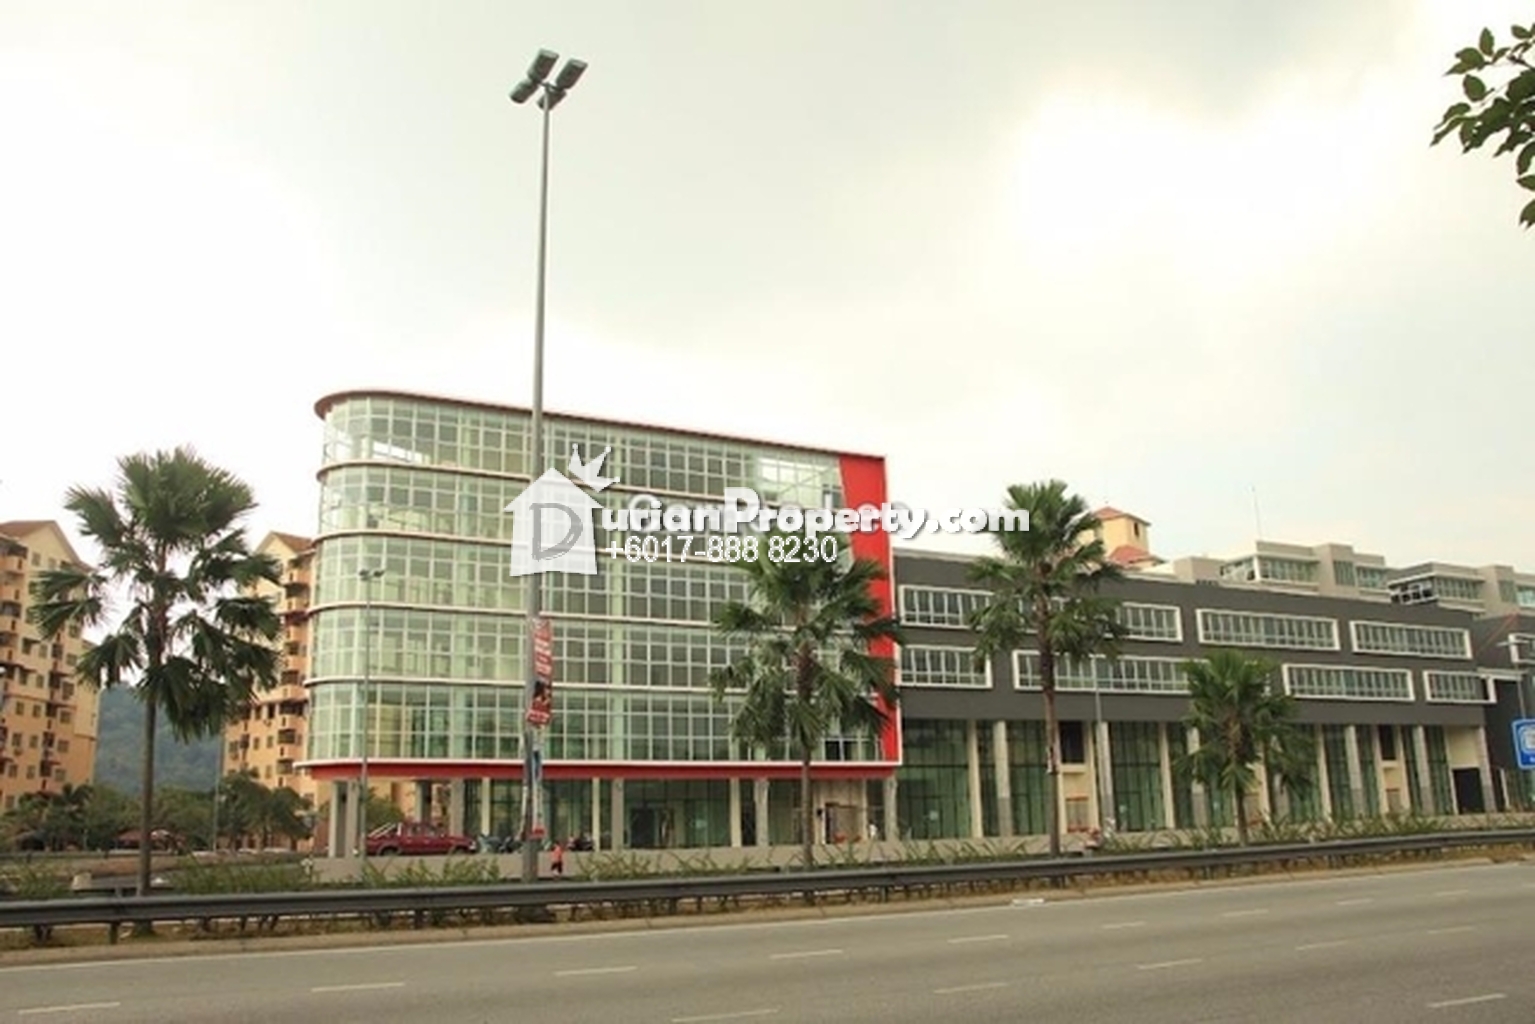 Office For Rent At Medan Klang Lama 28 Old Klang Road For Rm 4 000 By Carnea Lee Durianproperty